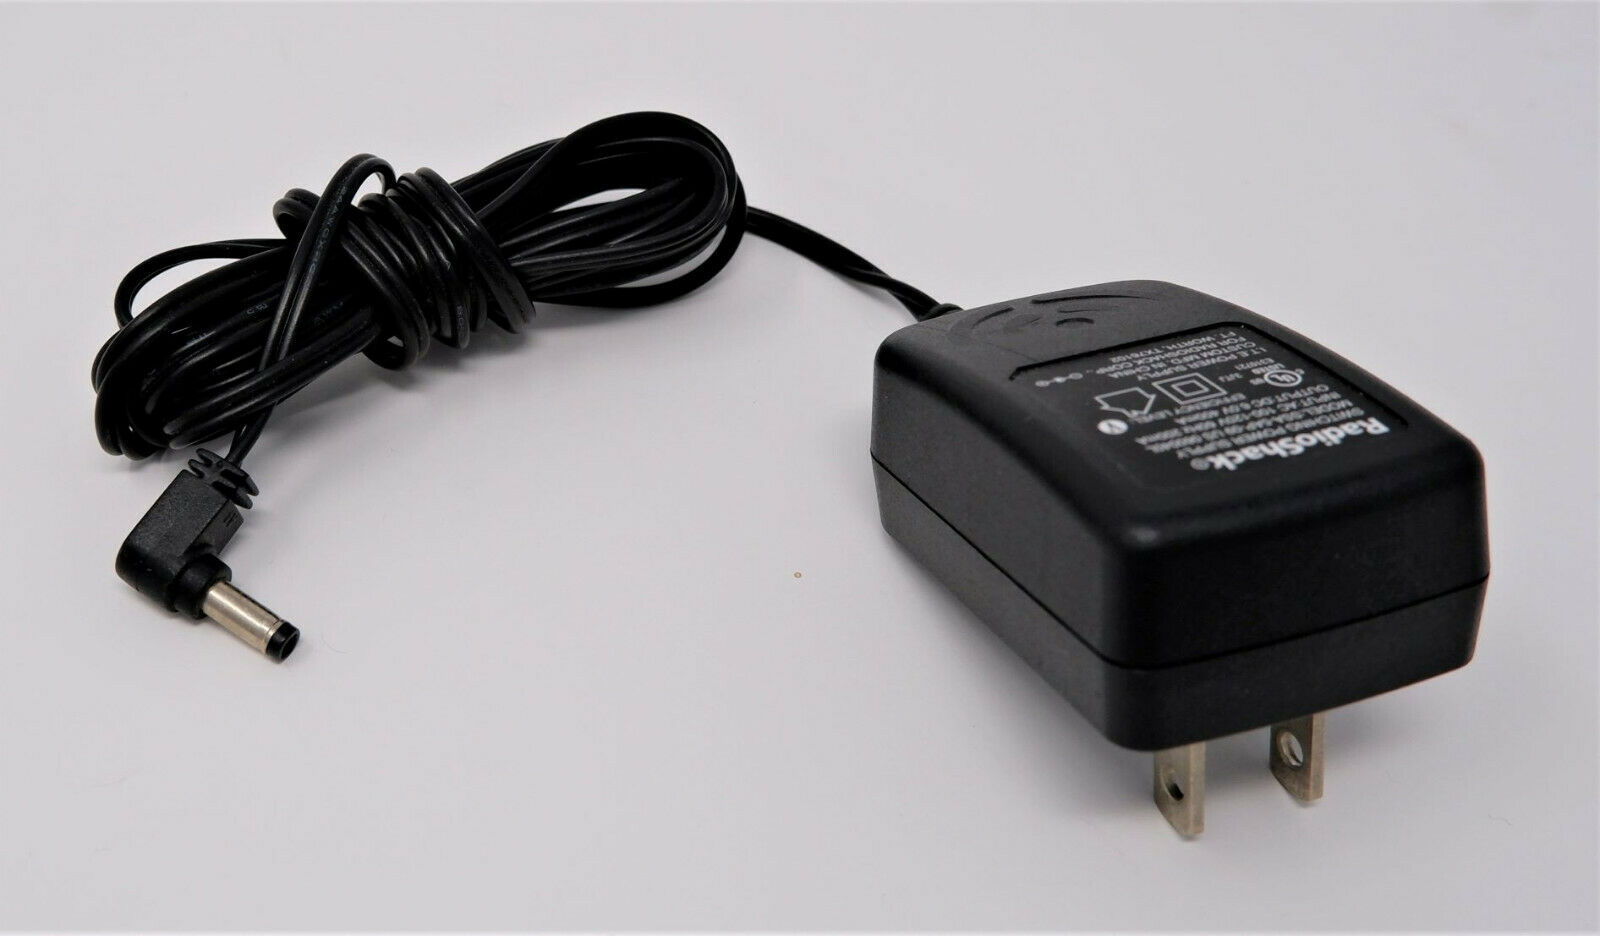 Microlife DVE DSA-0051-05C Adapter 6.5V 0.65A Power Supply Transformer Charger Brand: DVE Type: Adapter Features: P